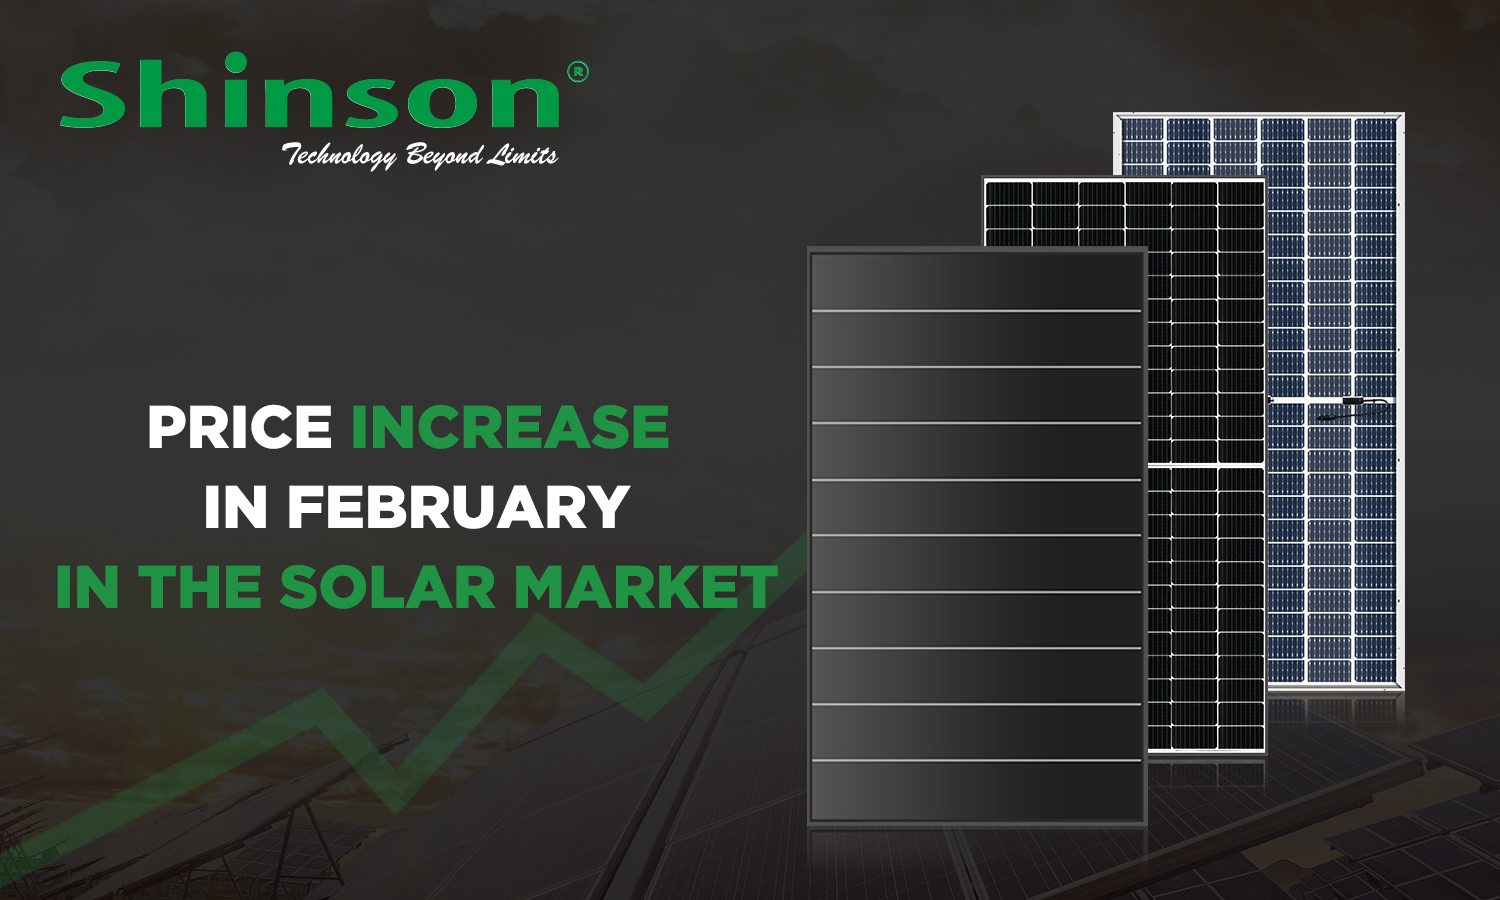 Price Increase For Pv Modules In February: What To Expect In The Solar Market?